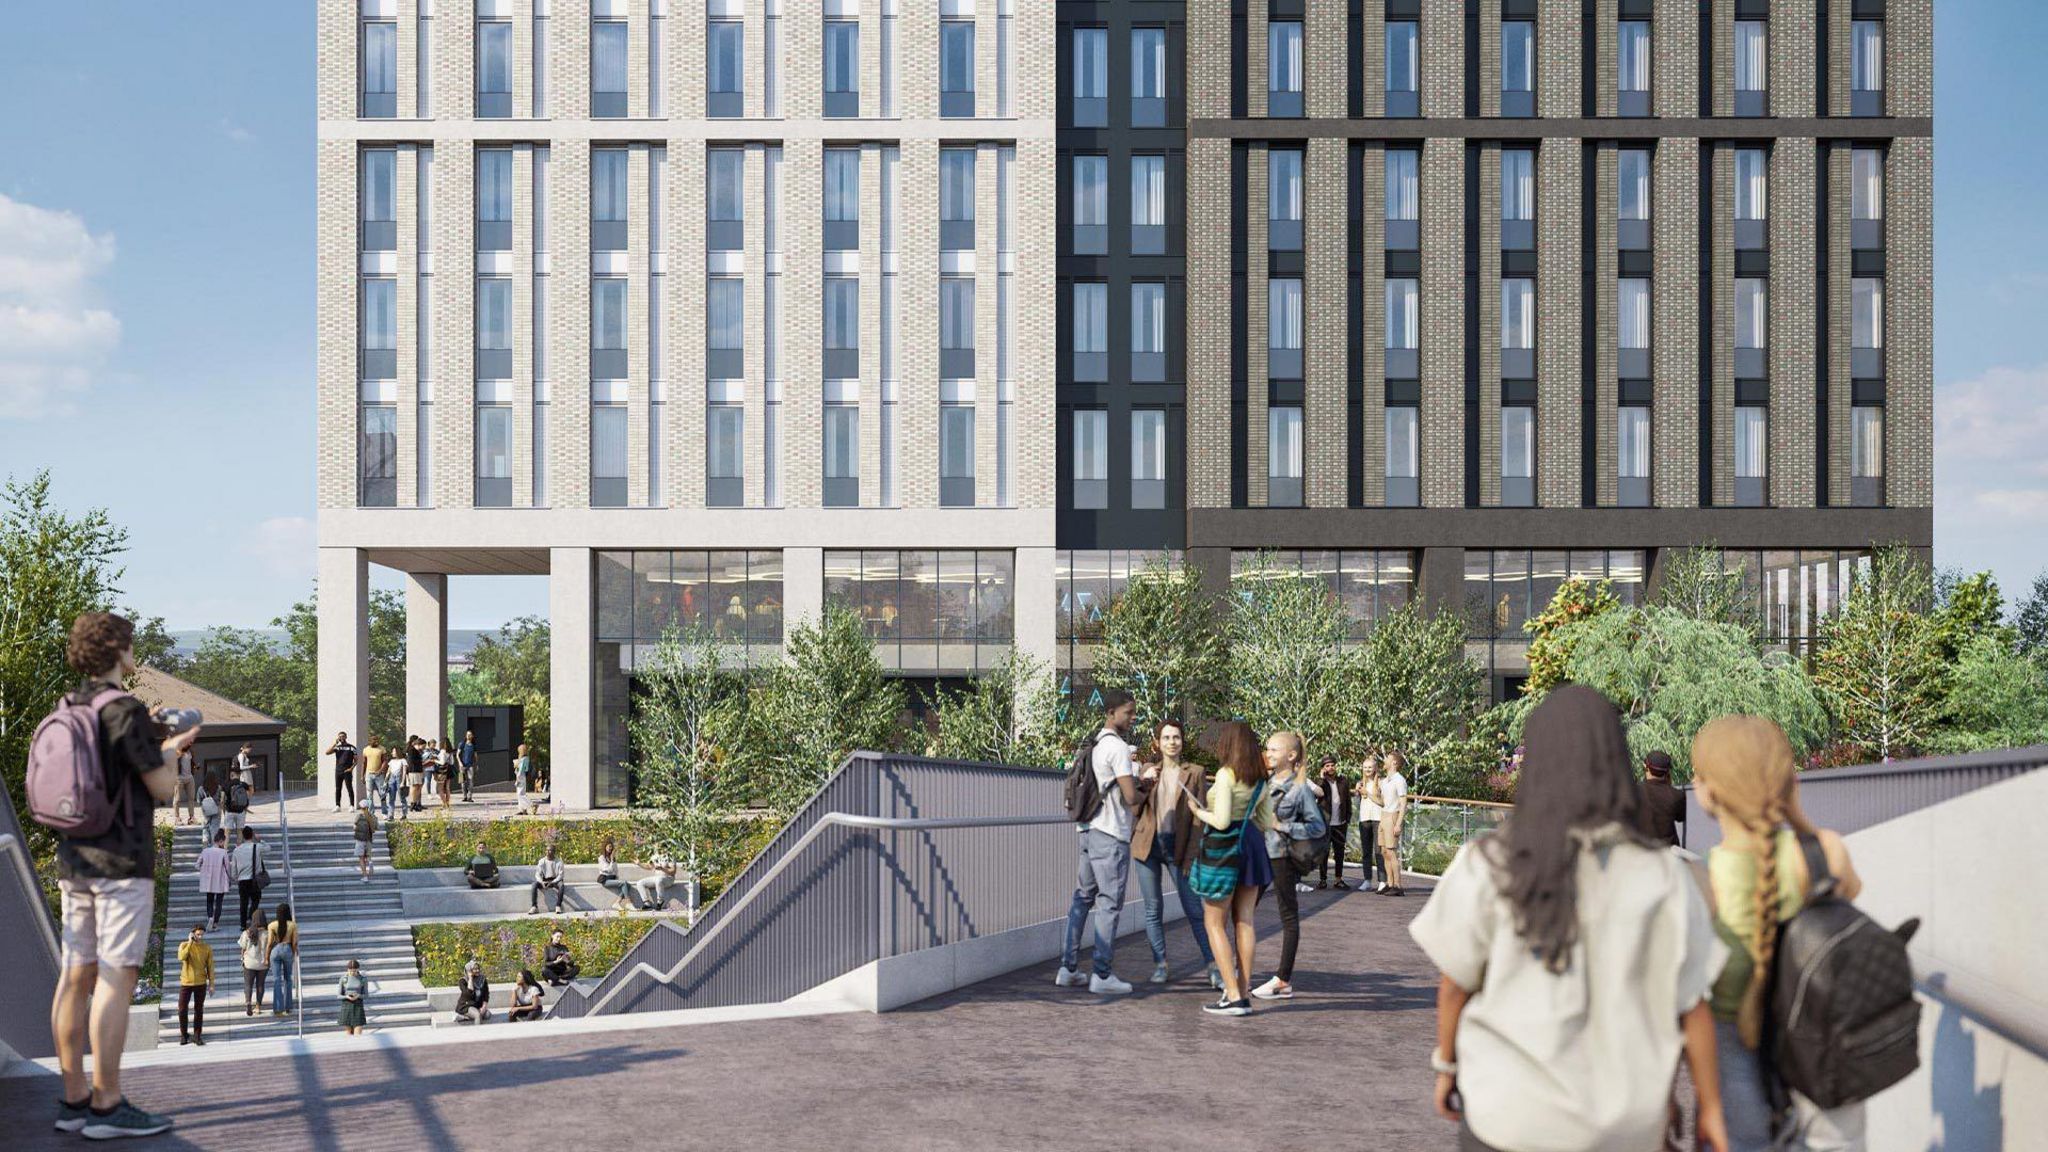 Artist impression of what the student tower block will look like. It is a white, grey and black building with lots of rectangular windows. CGI people are walking around the site, and there are some trees around the steps leading up to the tower.  